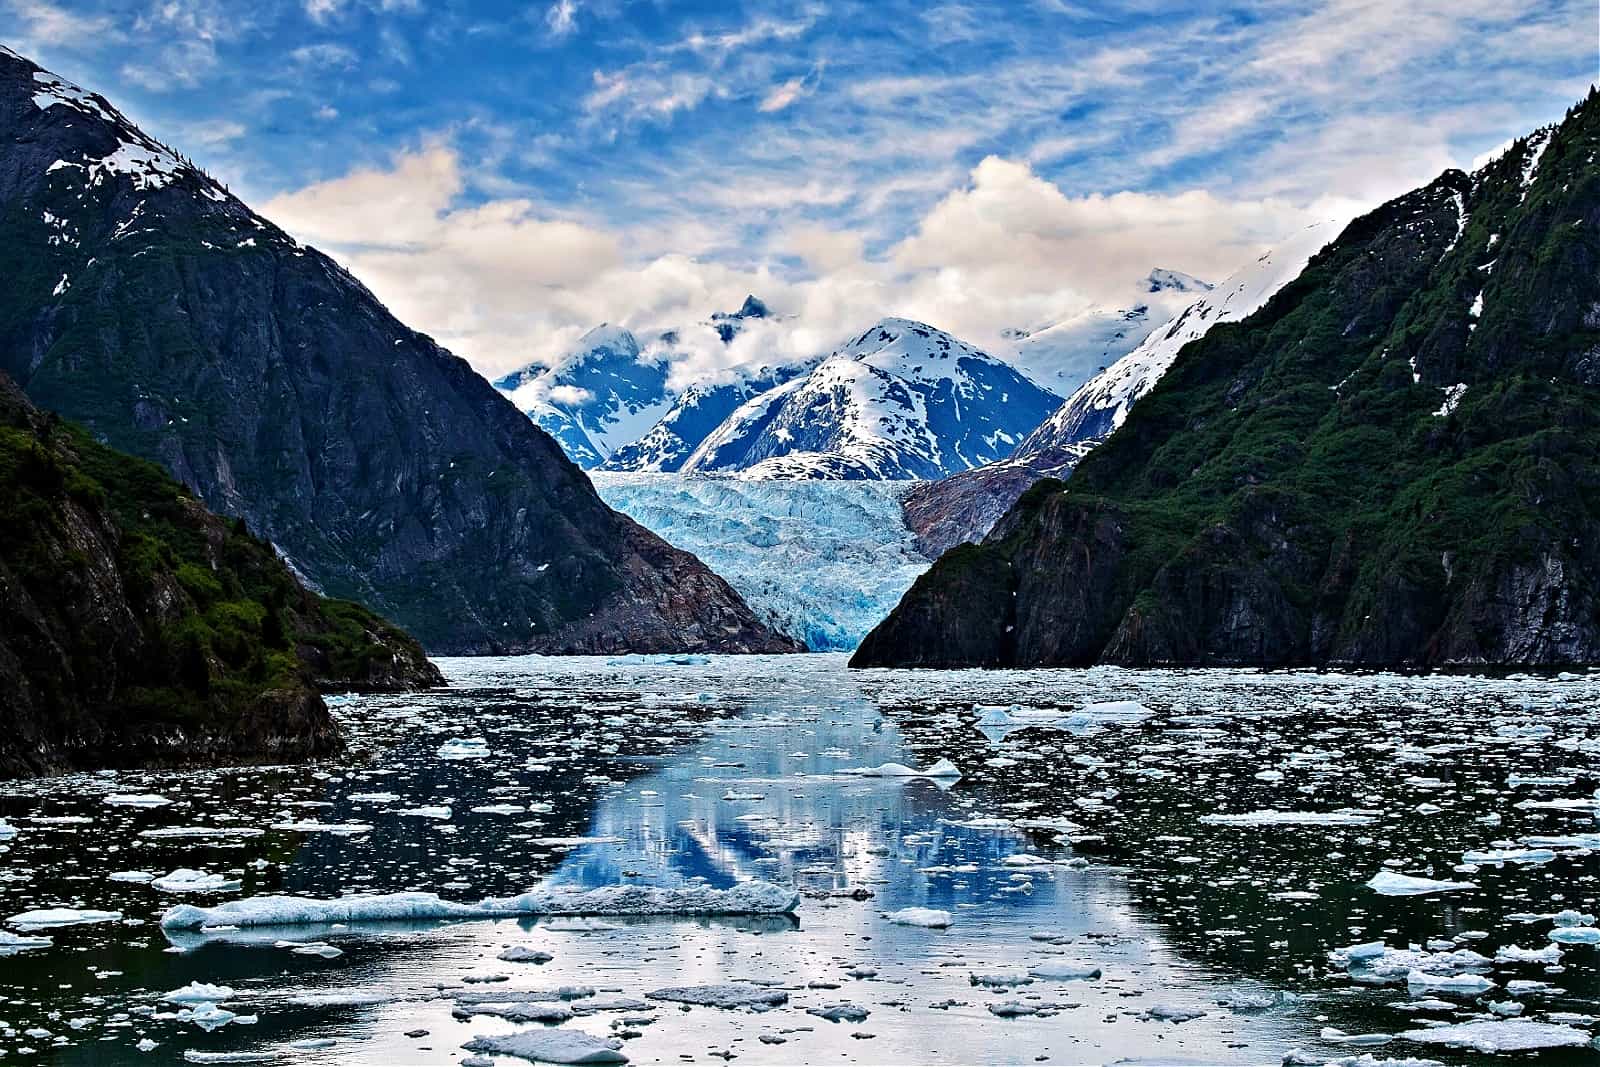 Sawyer Glacier at the end of Tracy Arm Fjord, Alaska